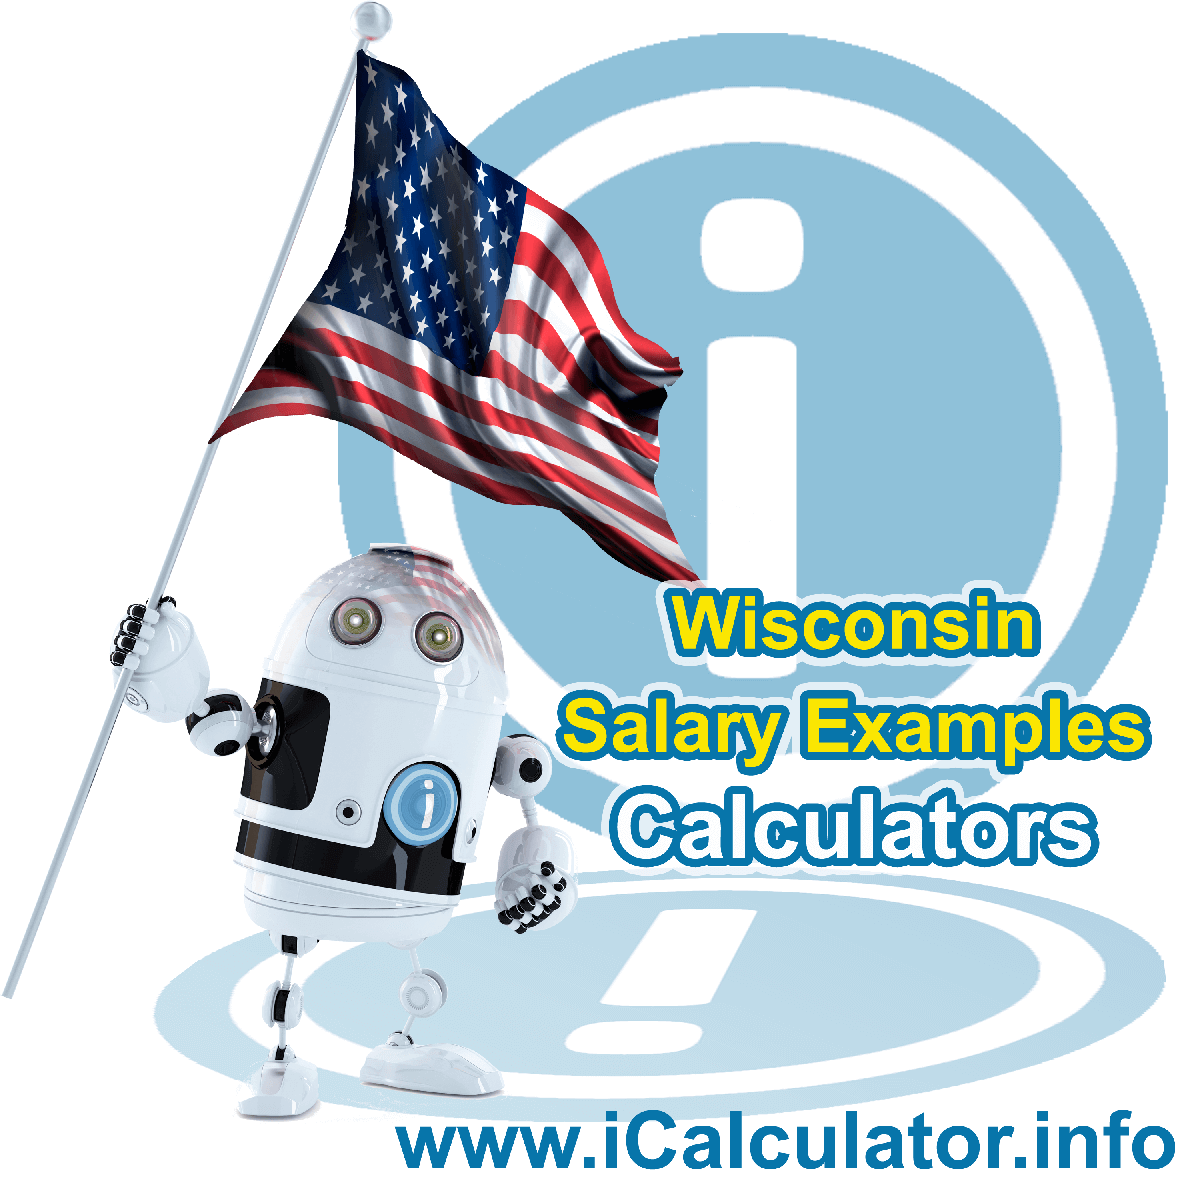 Wisconsin Salary Example for $ 110,000.00 in 2023 | iCalculator™ | $ 110,000.00 salary example for employee and employer paying Wisconsin State tincome taxes. Detailed salary after tax calculation including Wisconsin State Tax, Federal State Tax, Medicare Deductions, Social Security, Capital Gains and other income tax and salary deductions complete with supporting Wisconsin state tax tables 